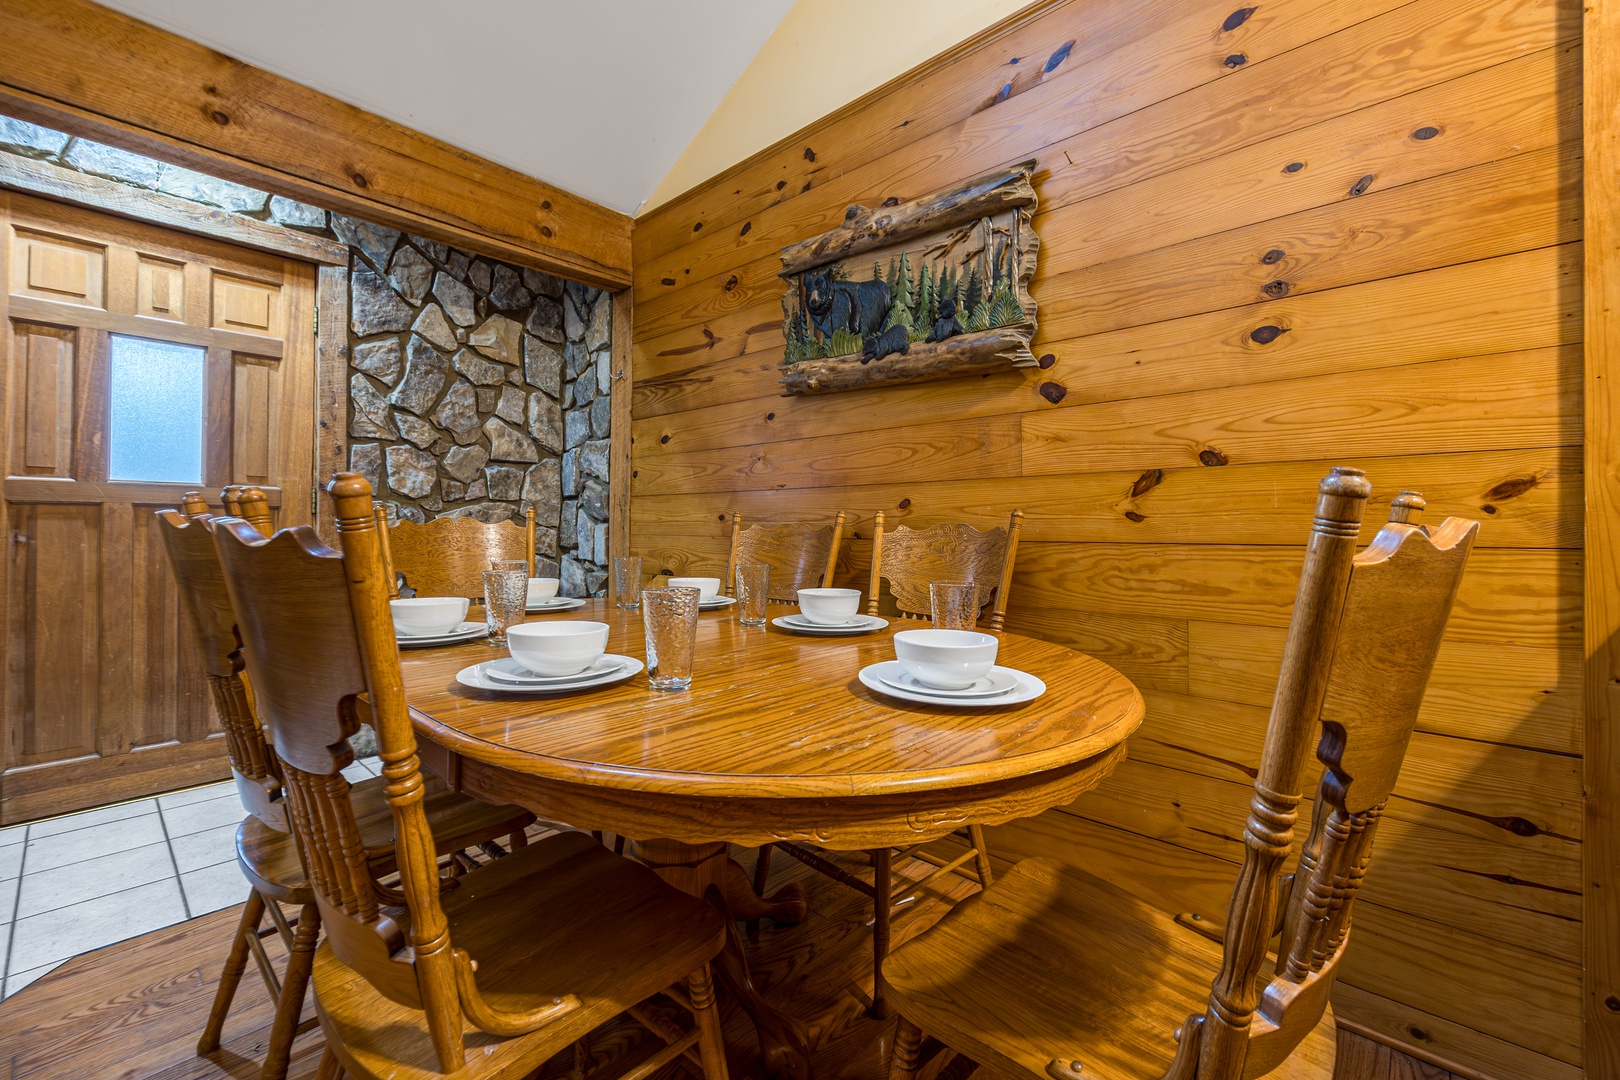 Dining Table for 4 at Just for Fun, a 4 bedroom cabin rental located in Pigeon Forge